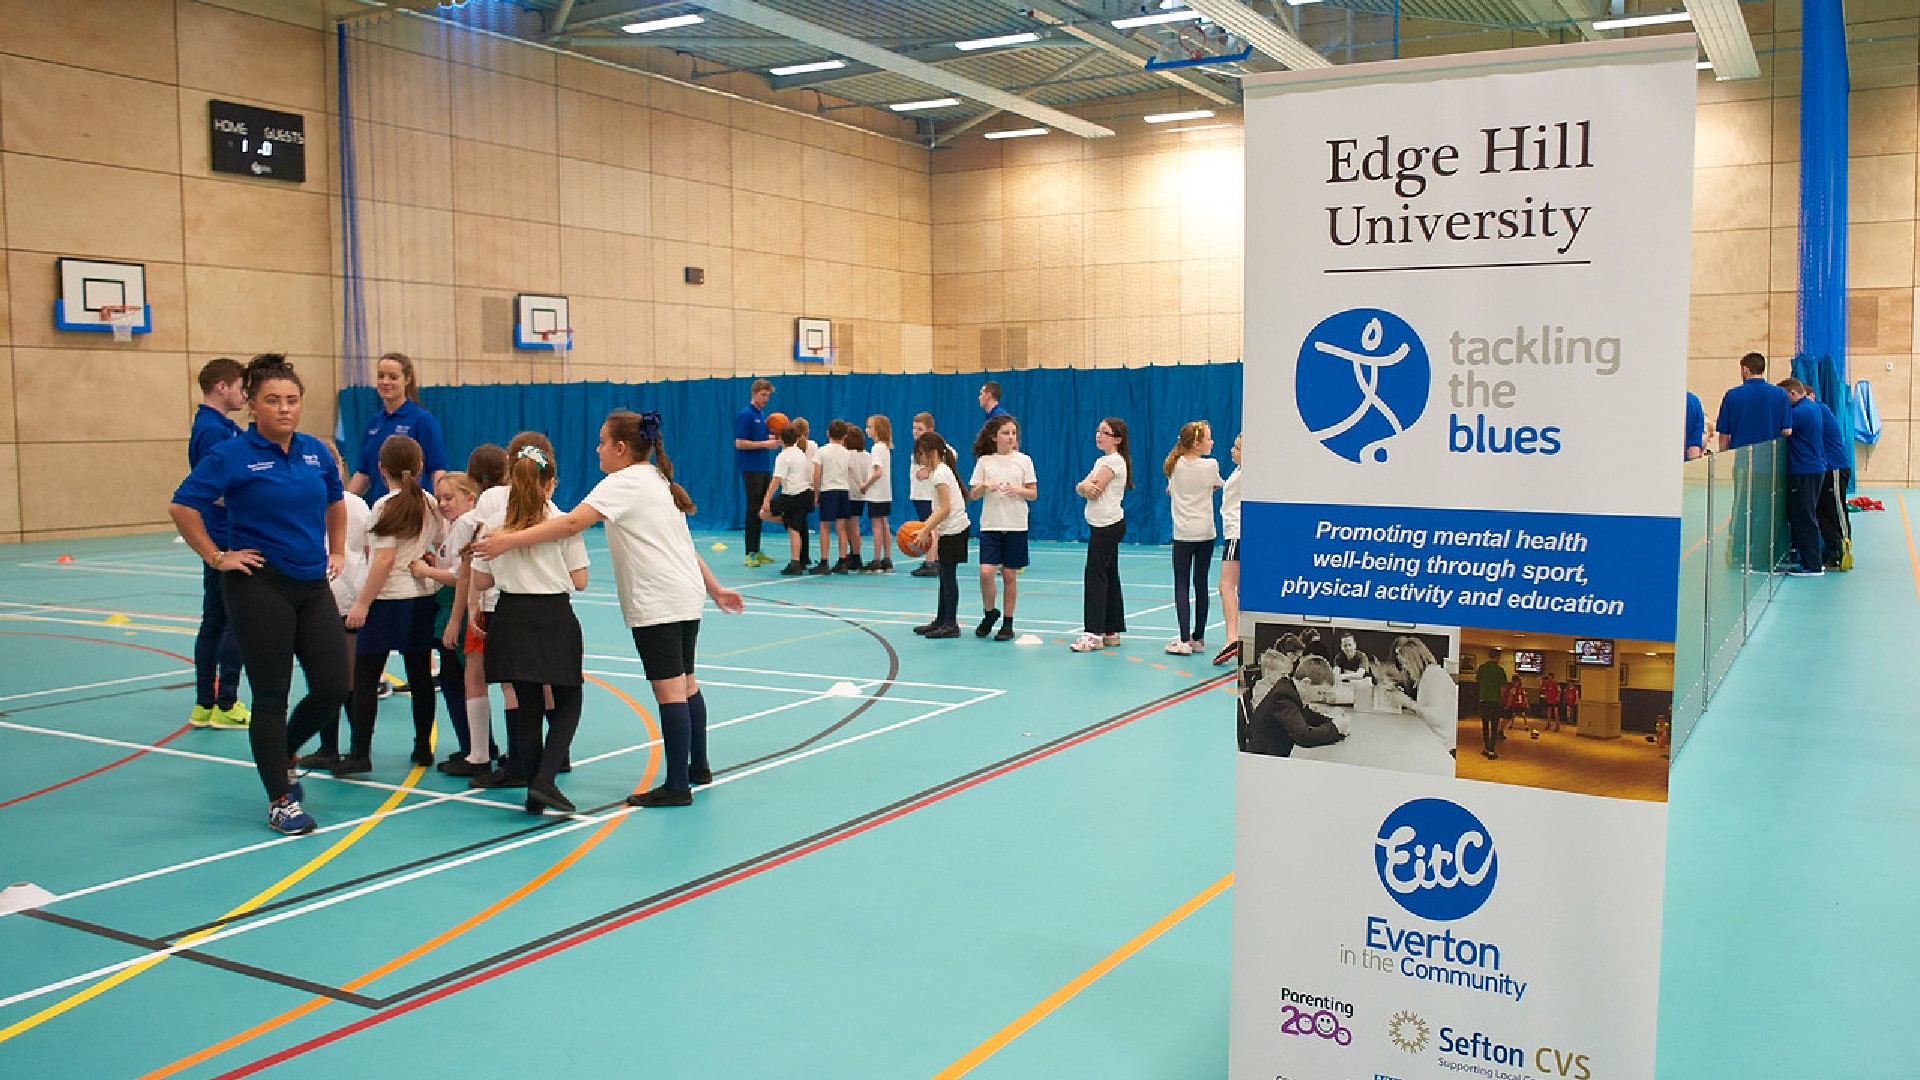 An image of a group of people stood in a group, next to them is a sign promoting the Edge Hill and Everton partnership.